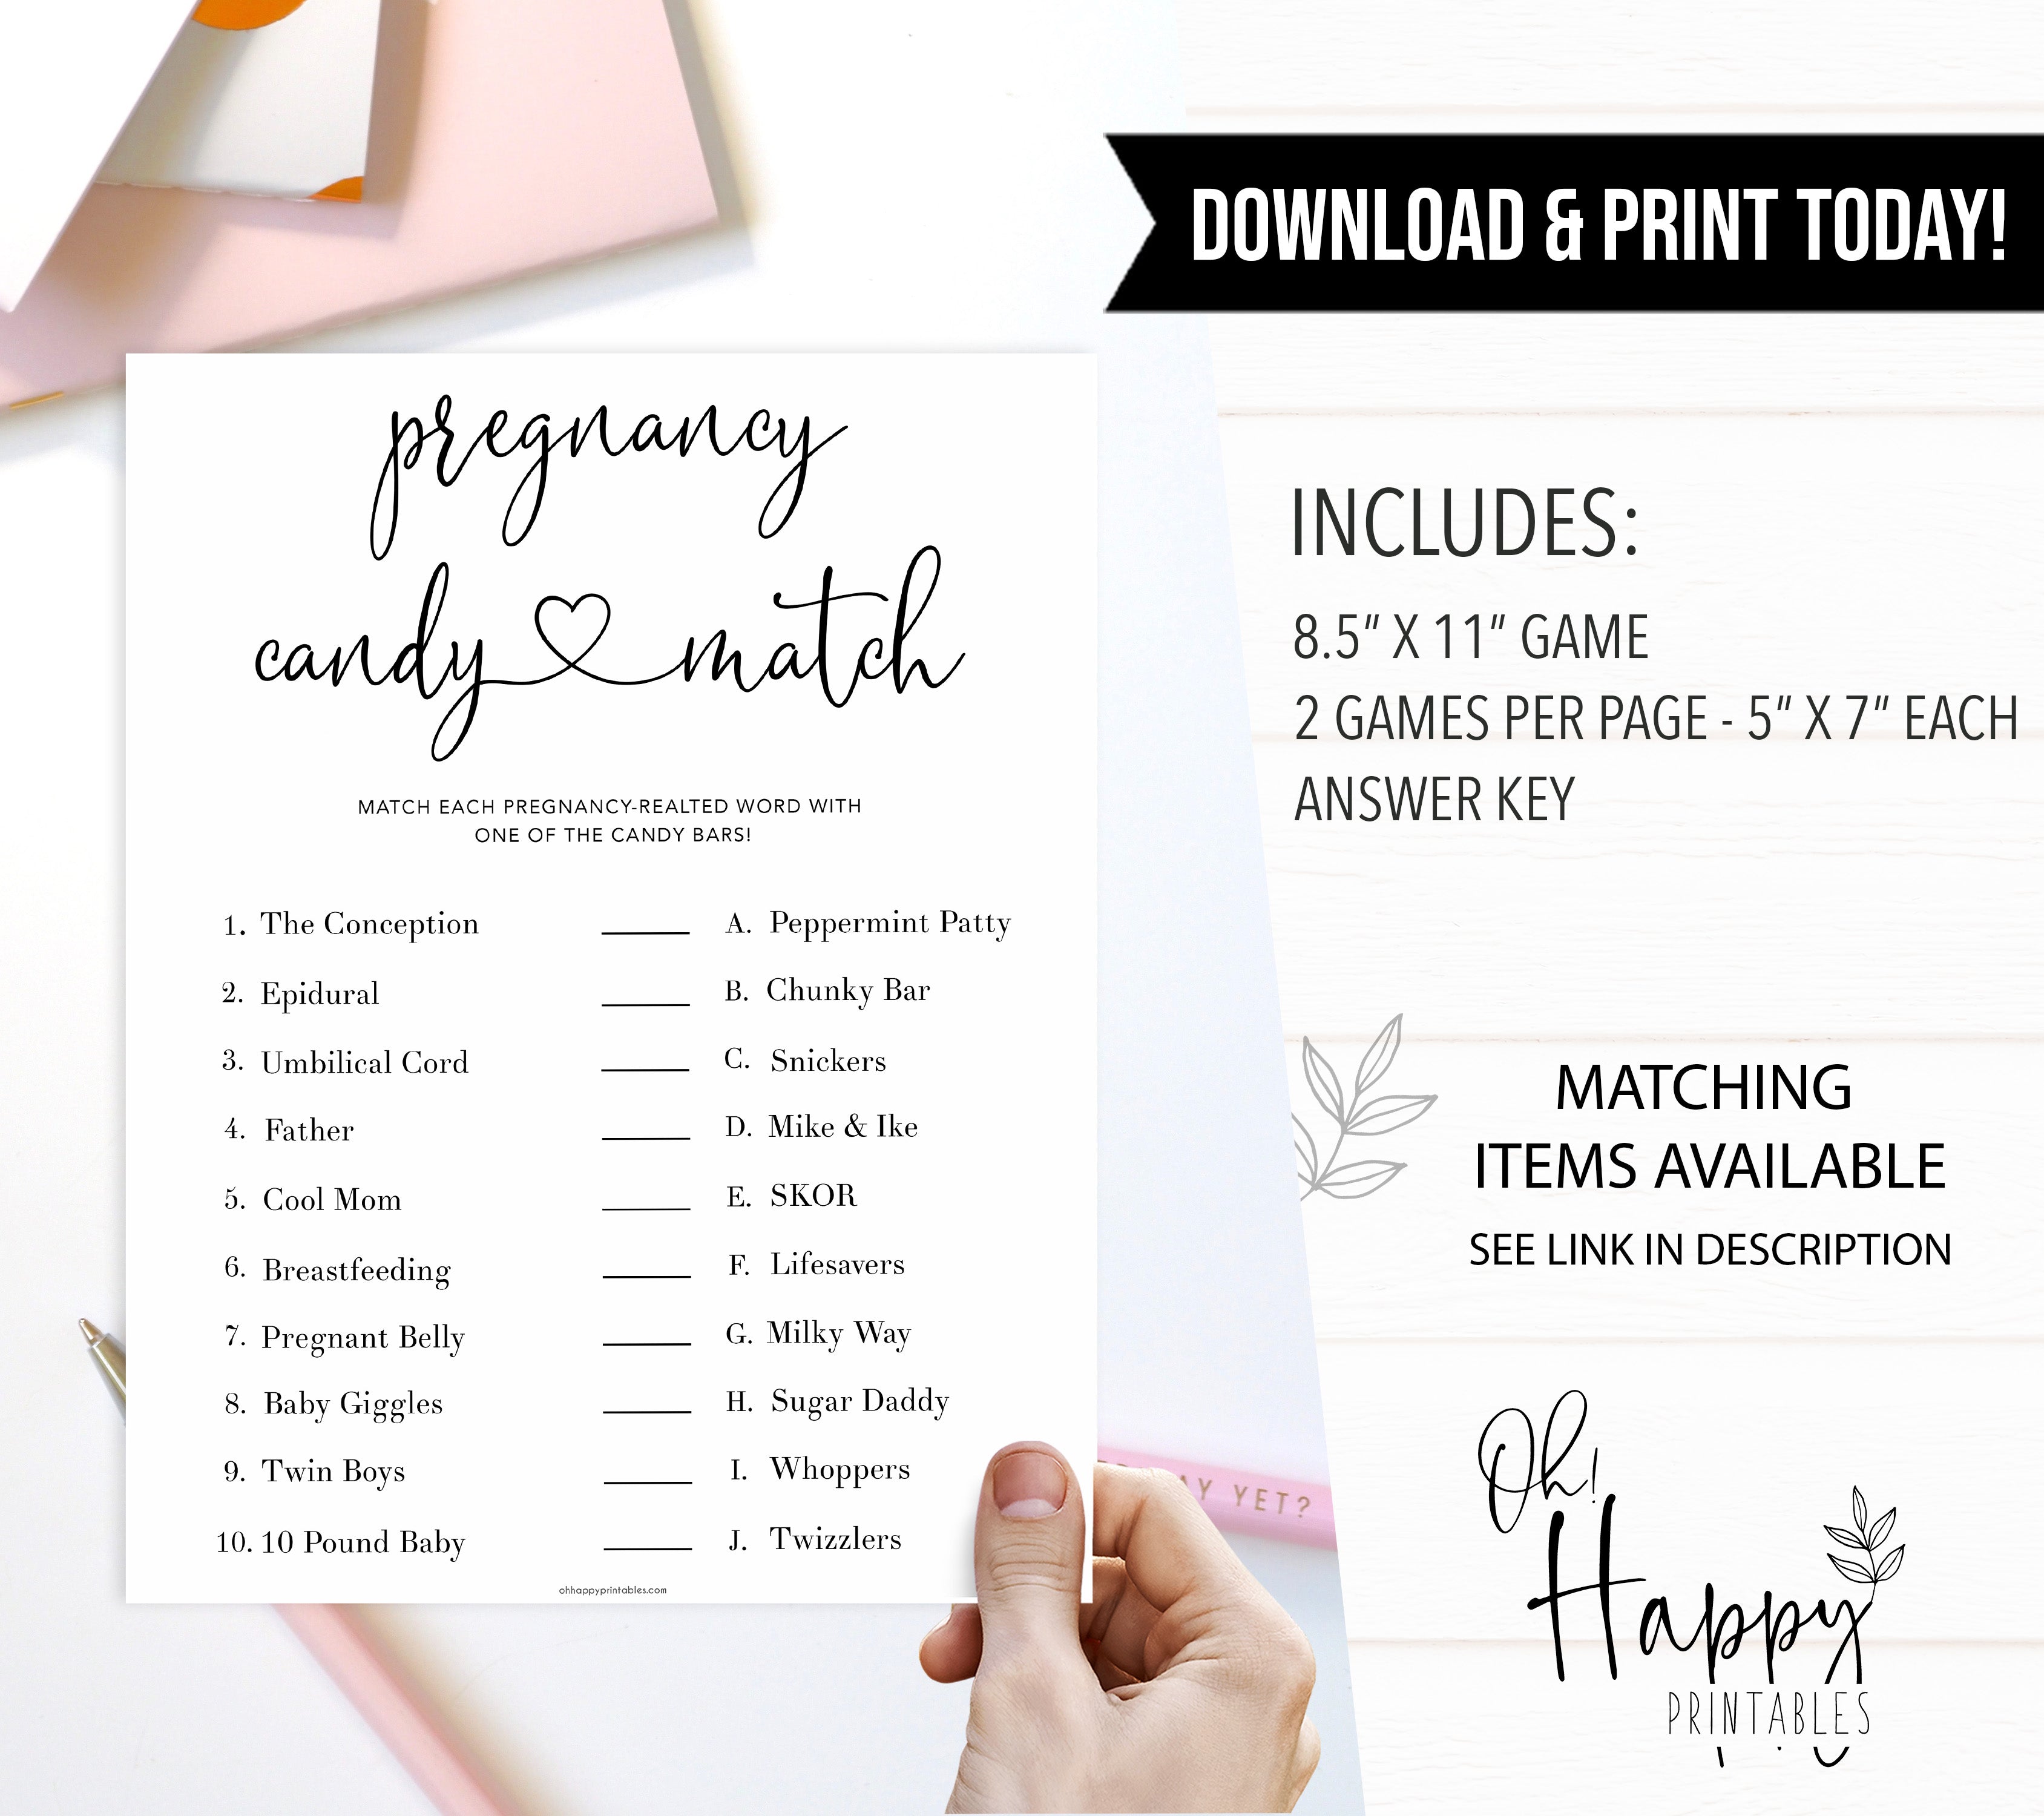 Minimalist baby shower games, pregnancy candy match baby games, 10 baby game bundles, fun baby games, printable baby games, top baby games, popular baby games, labor or porn games, neutral baby games, gender reveal games